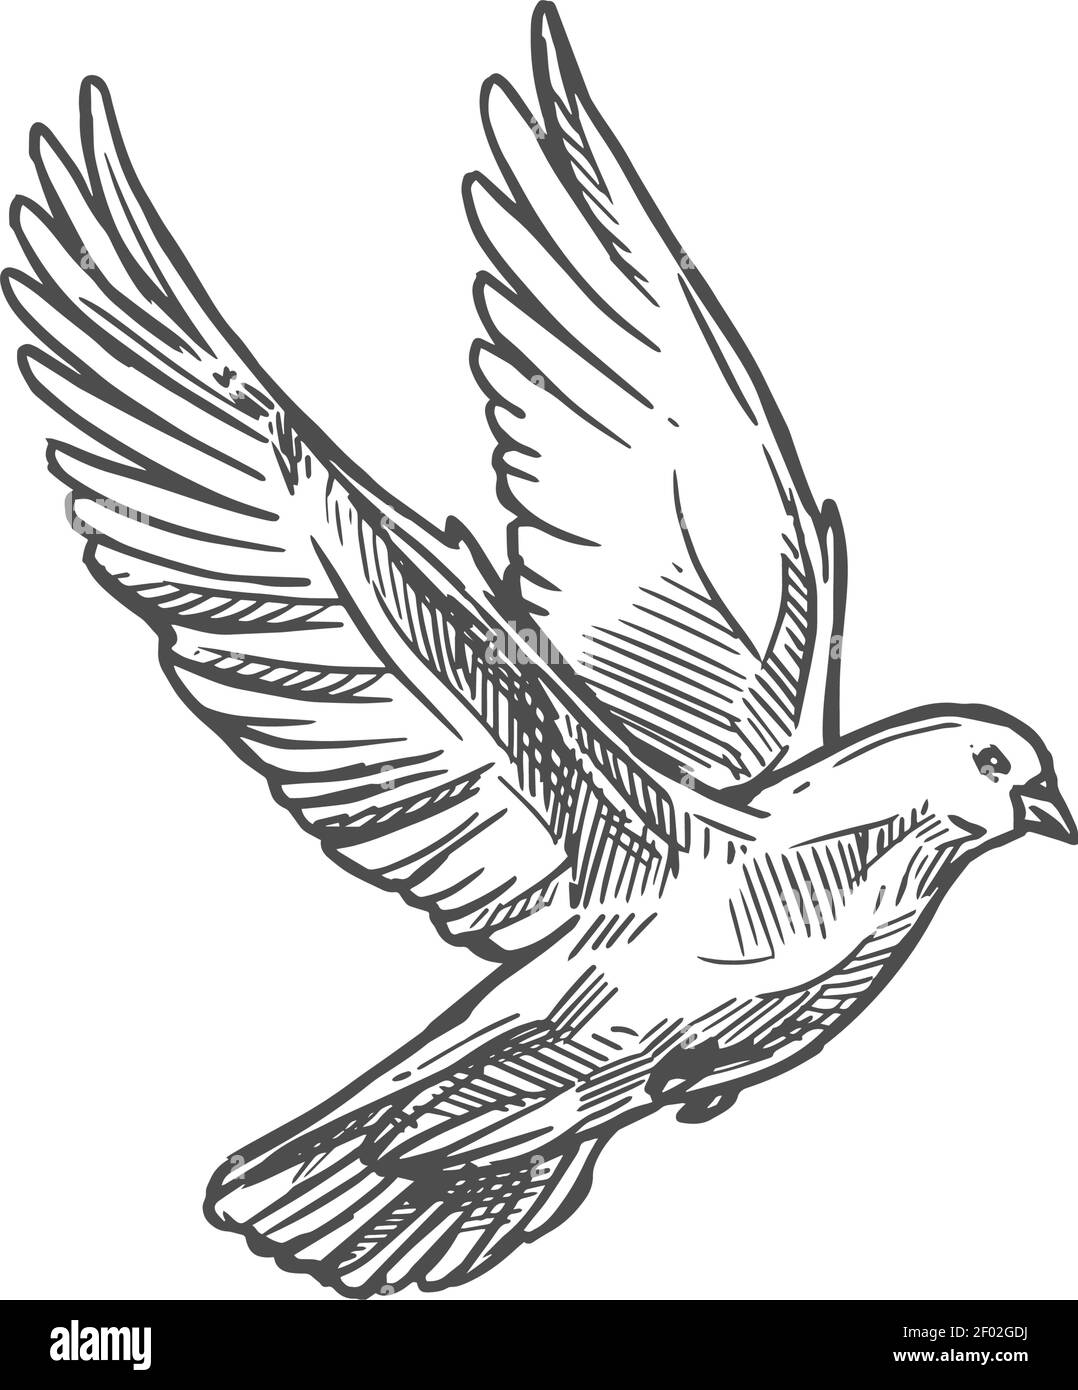 35 Lovely Dove Tattoos Designs Ideas  Meanings  Tattoo Me Now